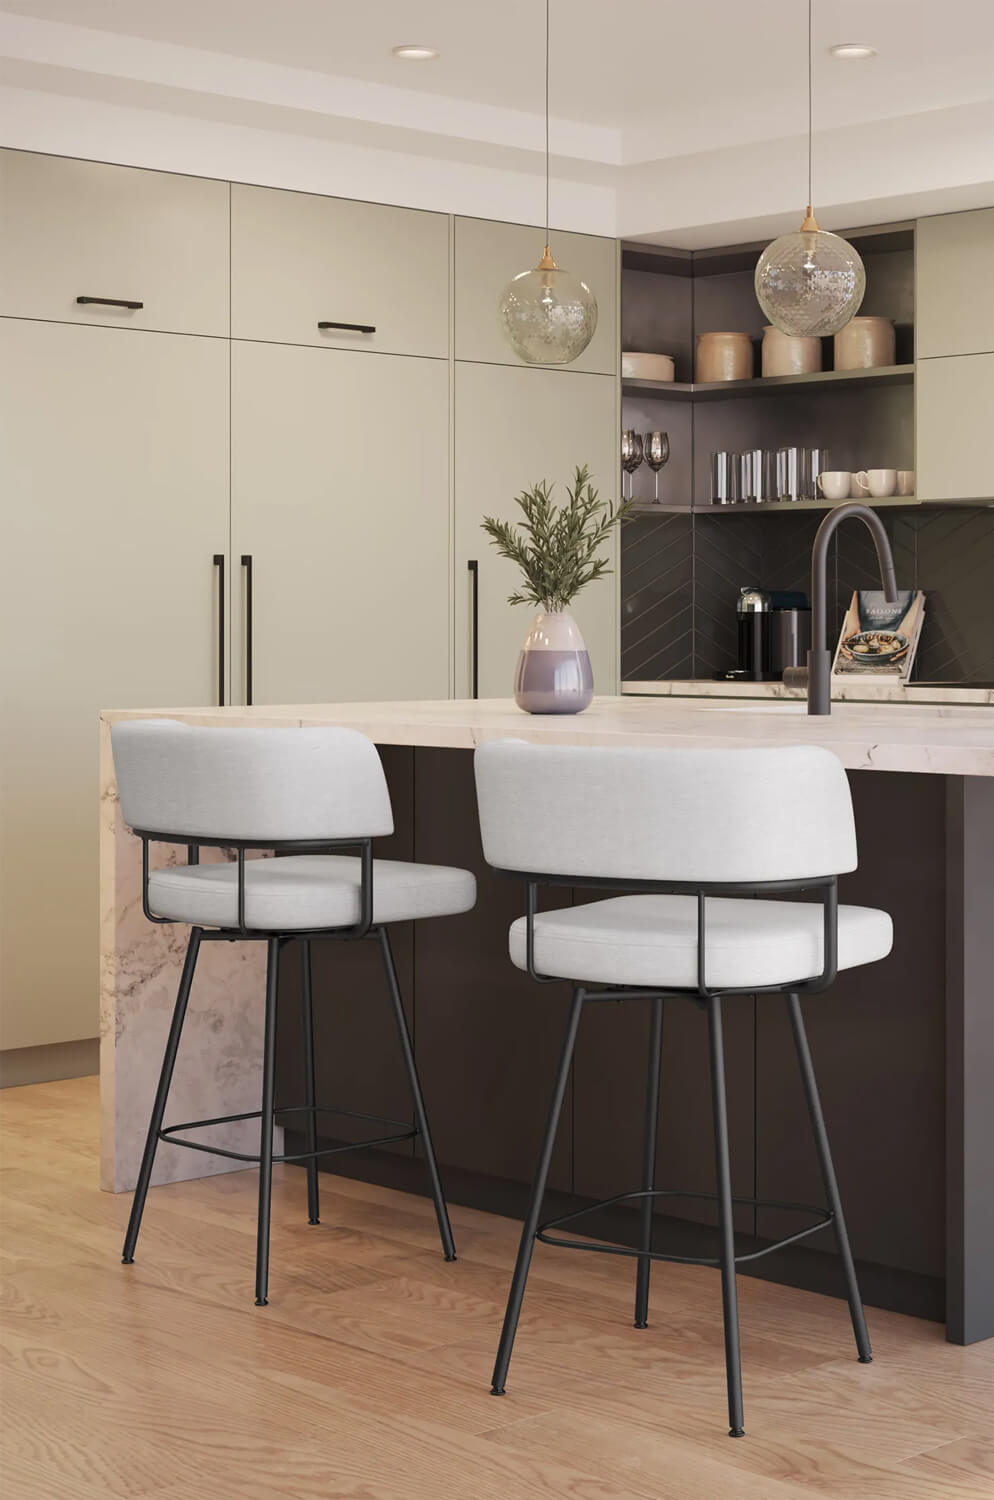 Amisco's Enya Black and White Low Back Swivel Bar Stools in Modern Kitchen